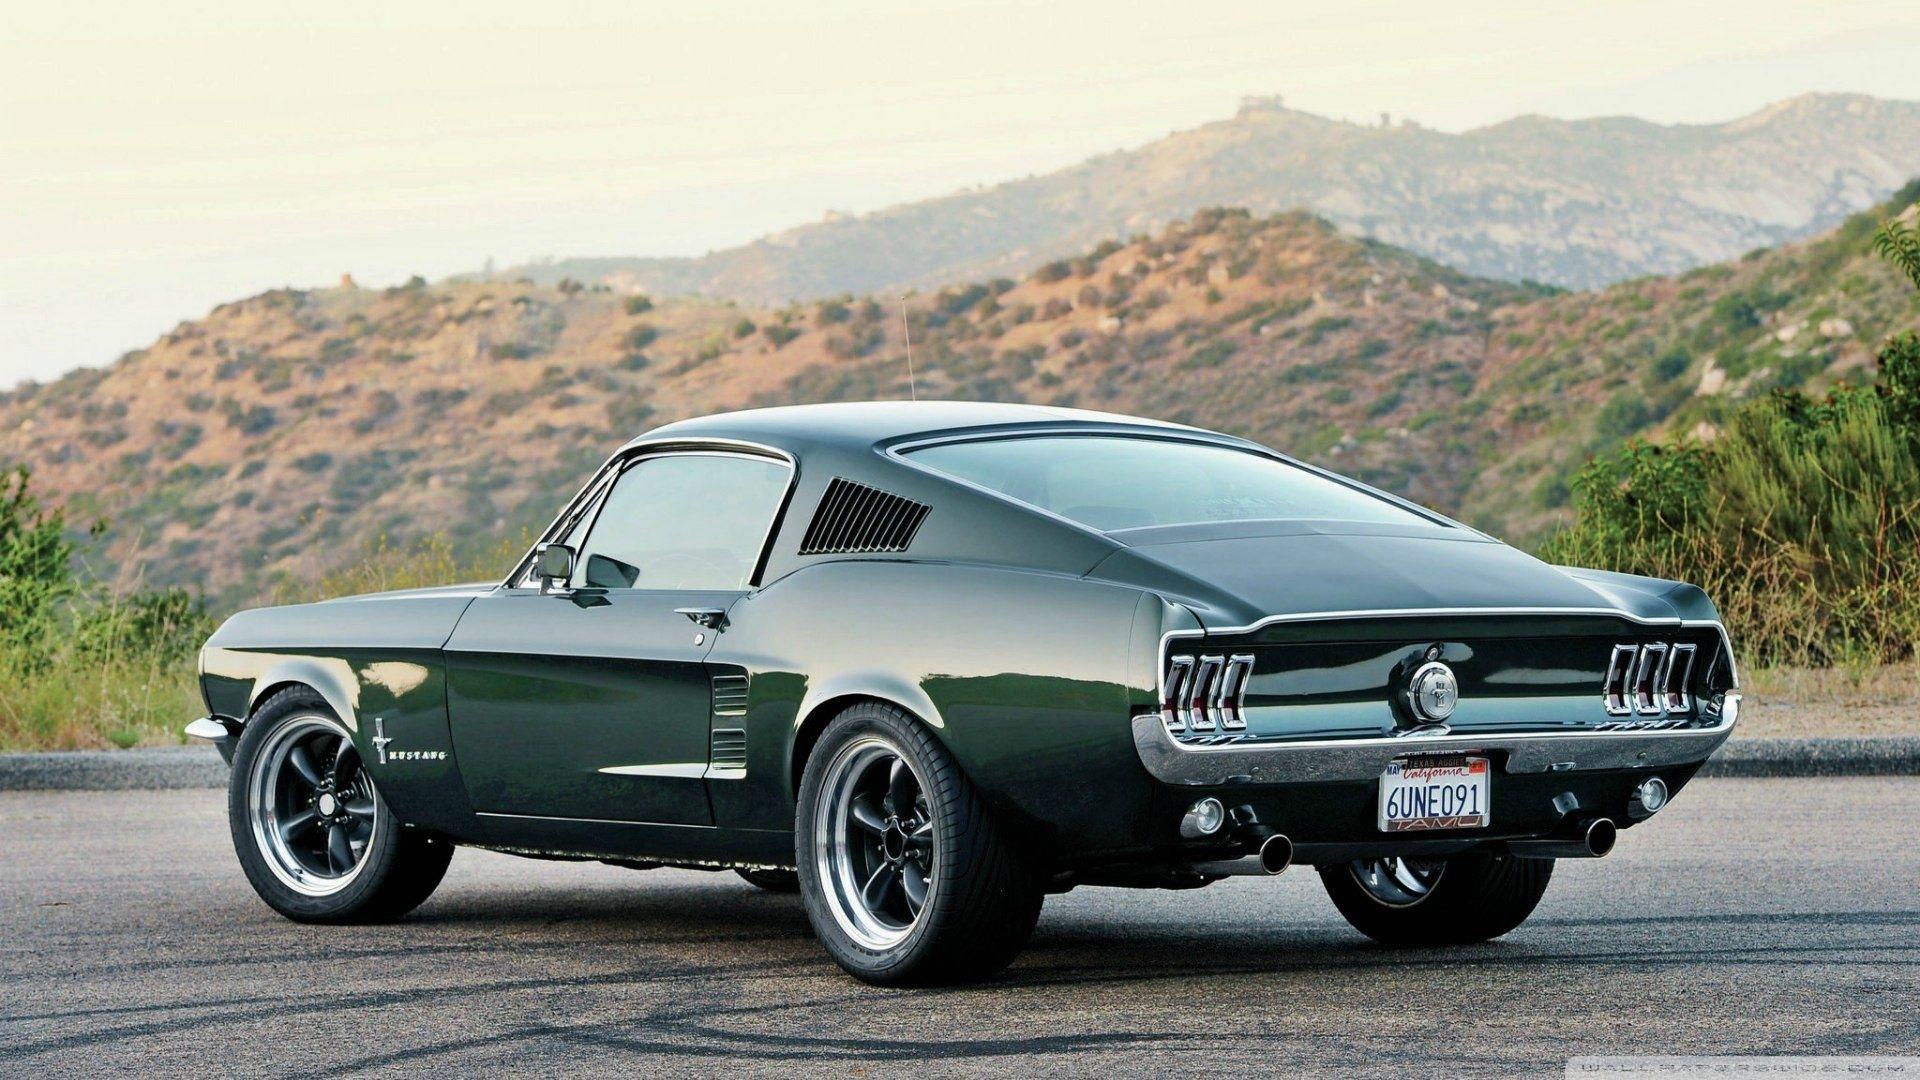 Ford Mustang Fastback Wallpaper and Background Image